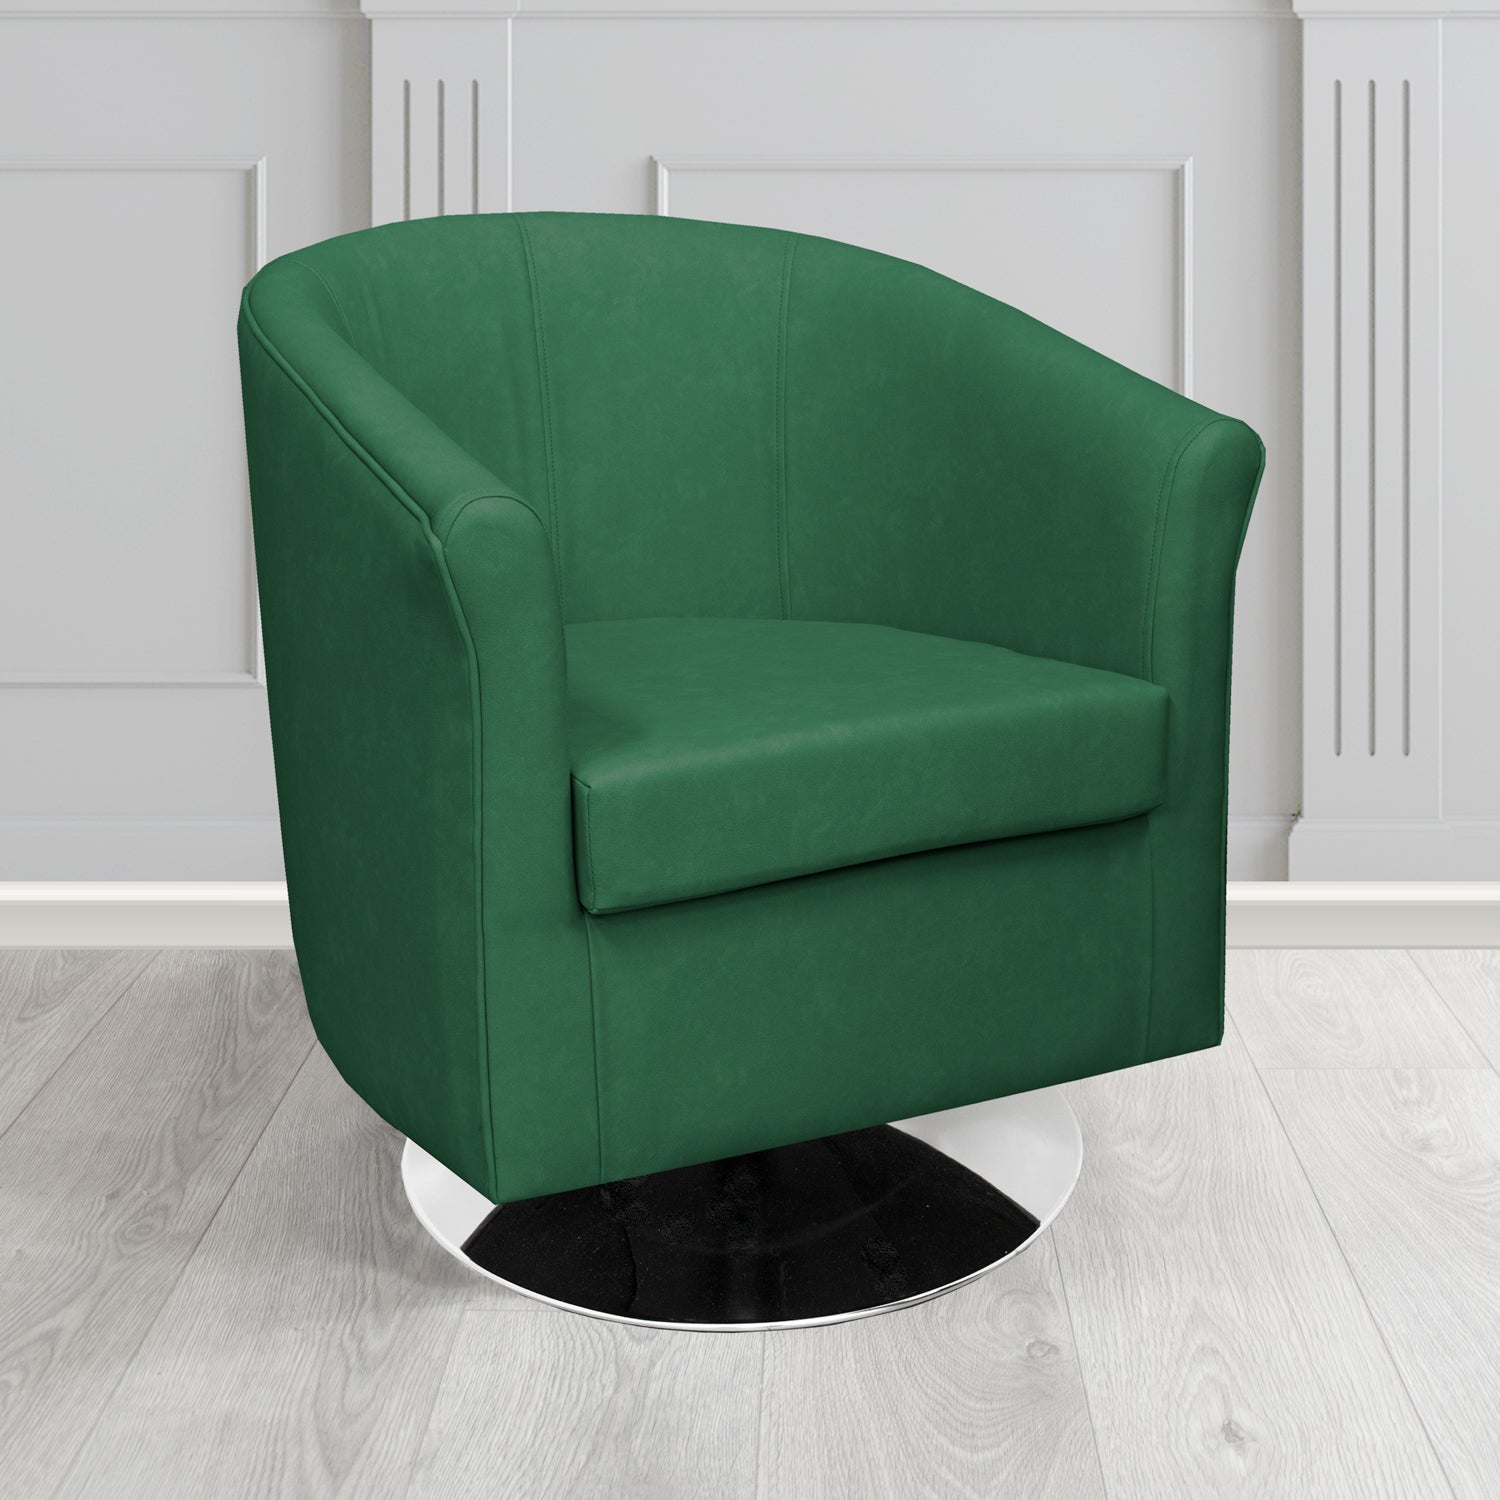 Tuscany Swivel Tub Chair in Infiniti Racing INF1853 Antimicrobial Crib 5 Faux Leather - The Tub Chair Shop